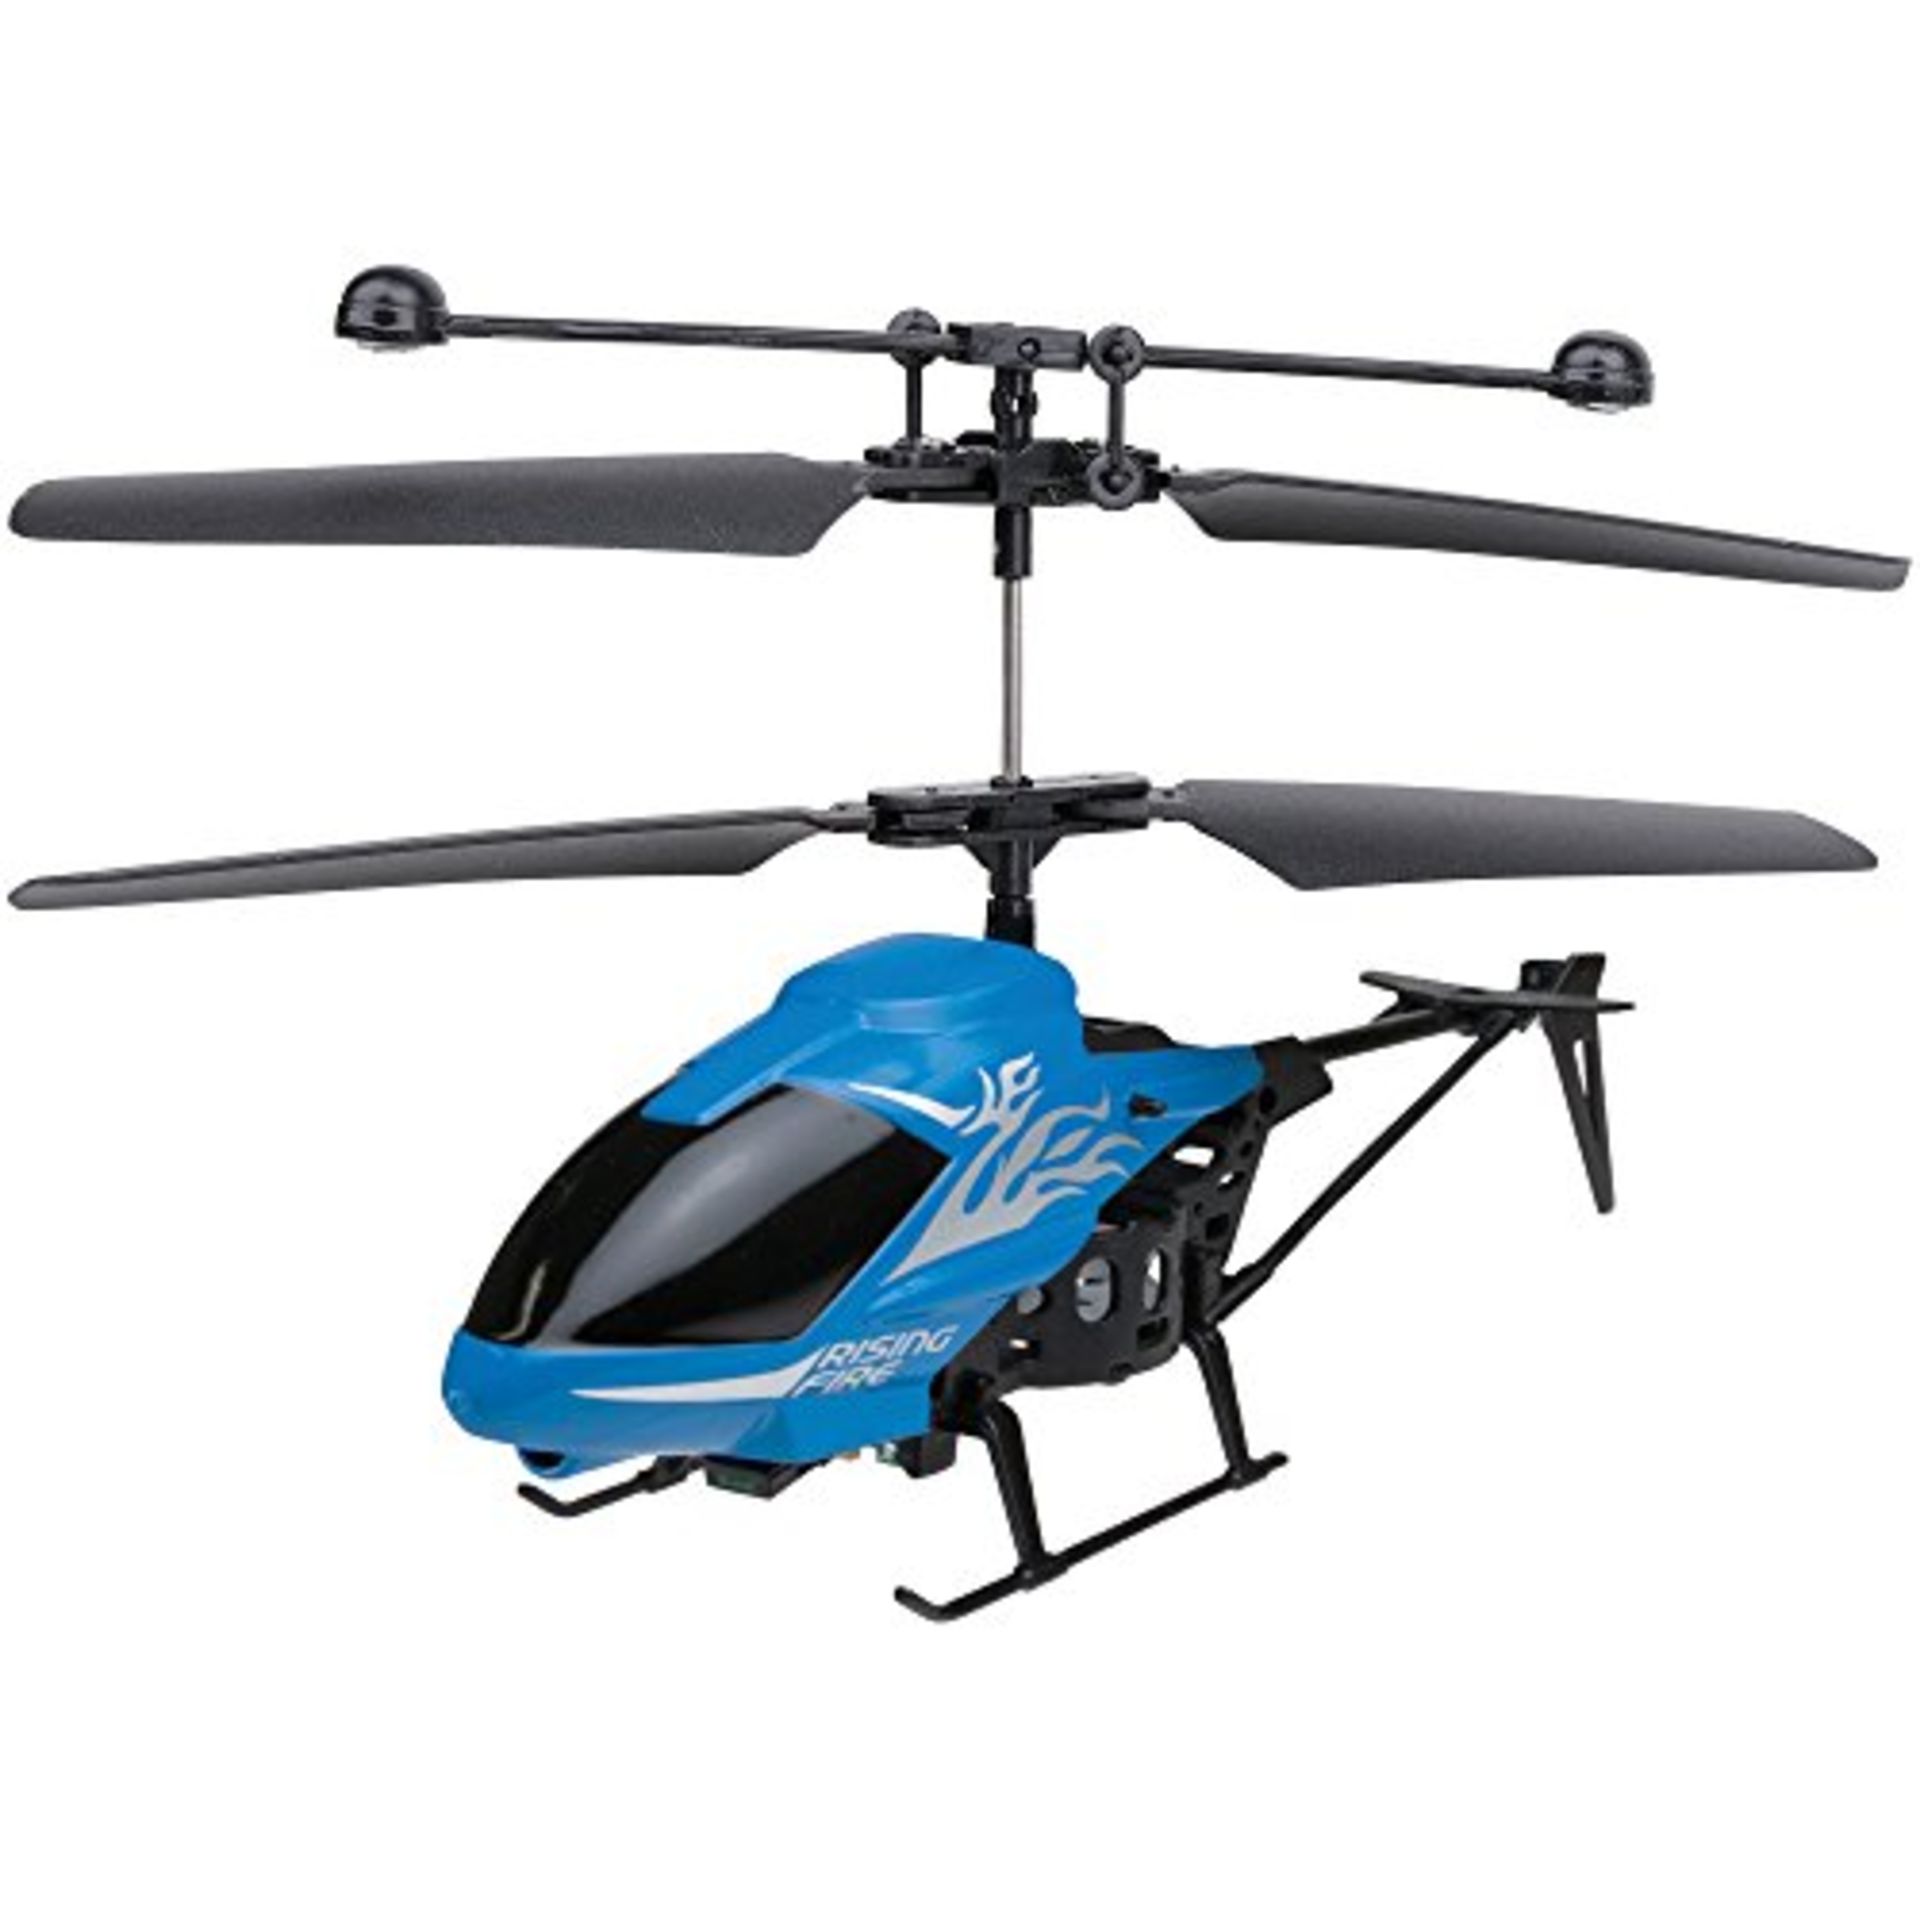 V *TRADE QTY* Brand New Interceptor X-20 Radio Controlled Helicopter Brand New Sealed Complete - Image 2 of 2